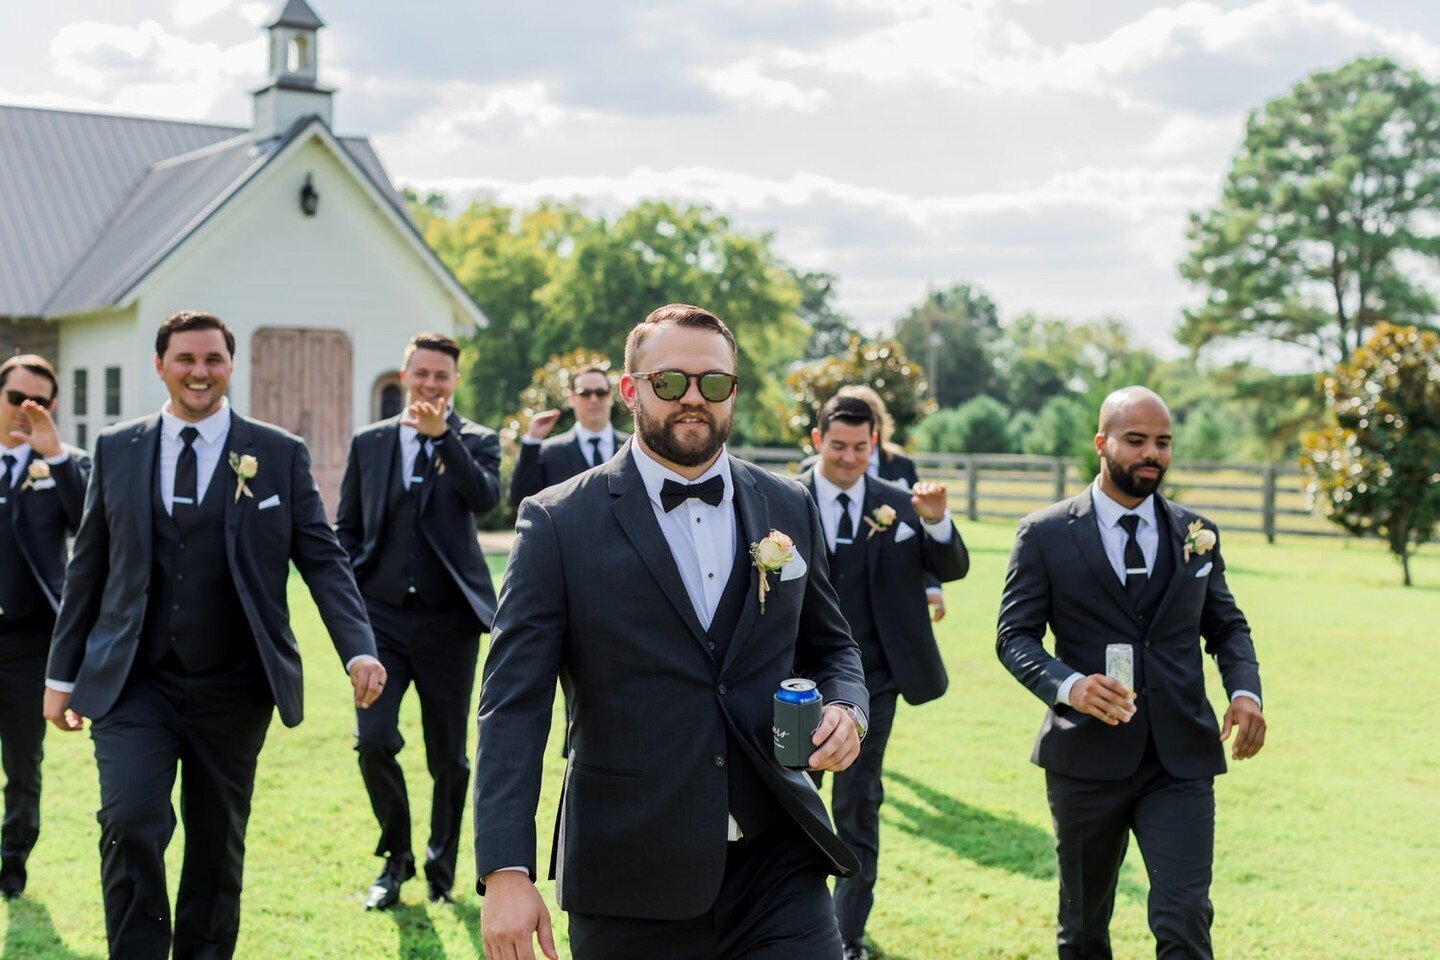 Men coming alongside their friend for his wedding day--it's a great thing!